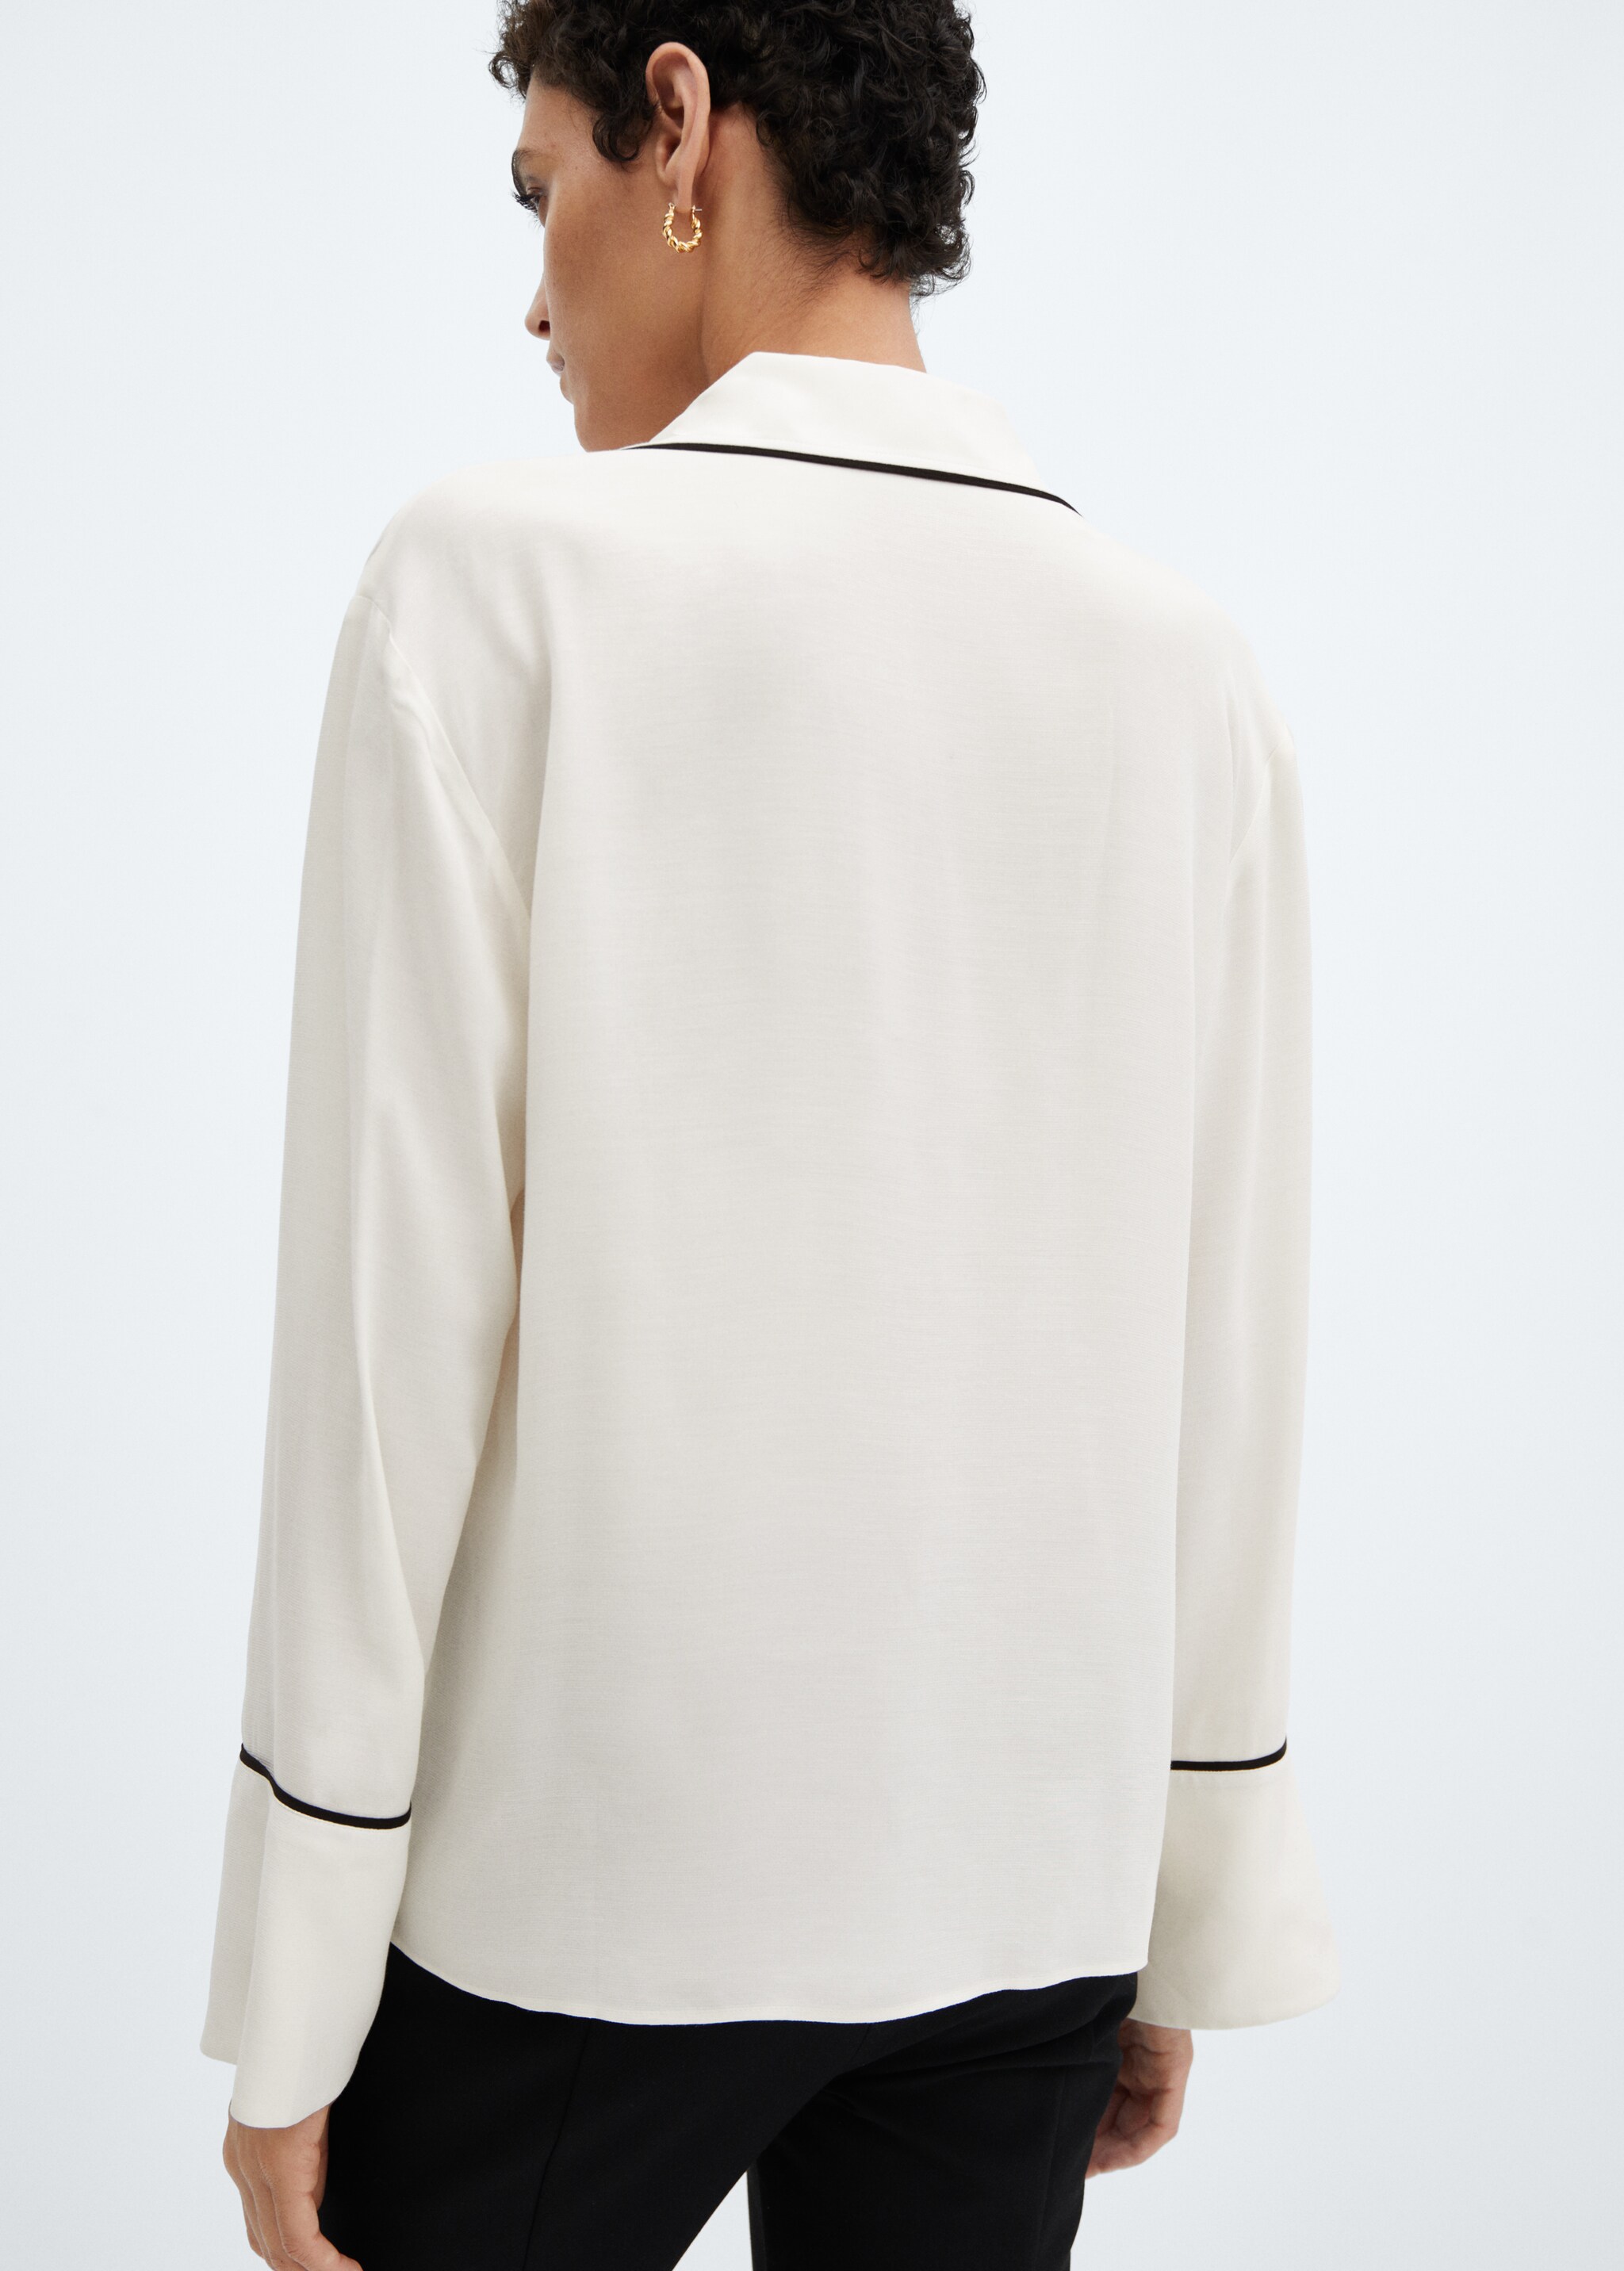 Contrast trim shirt - Reverse of the article